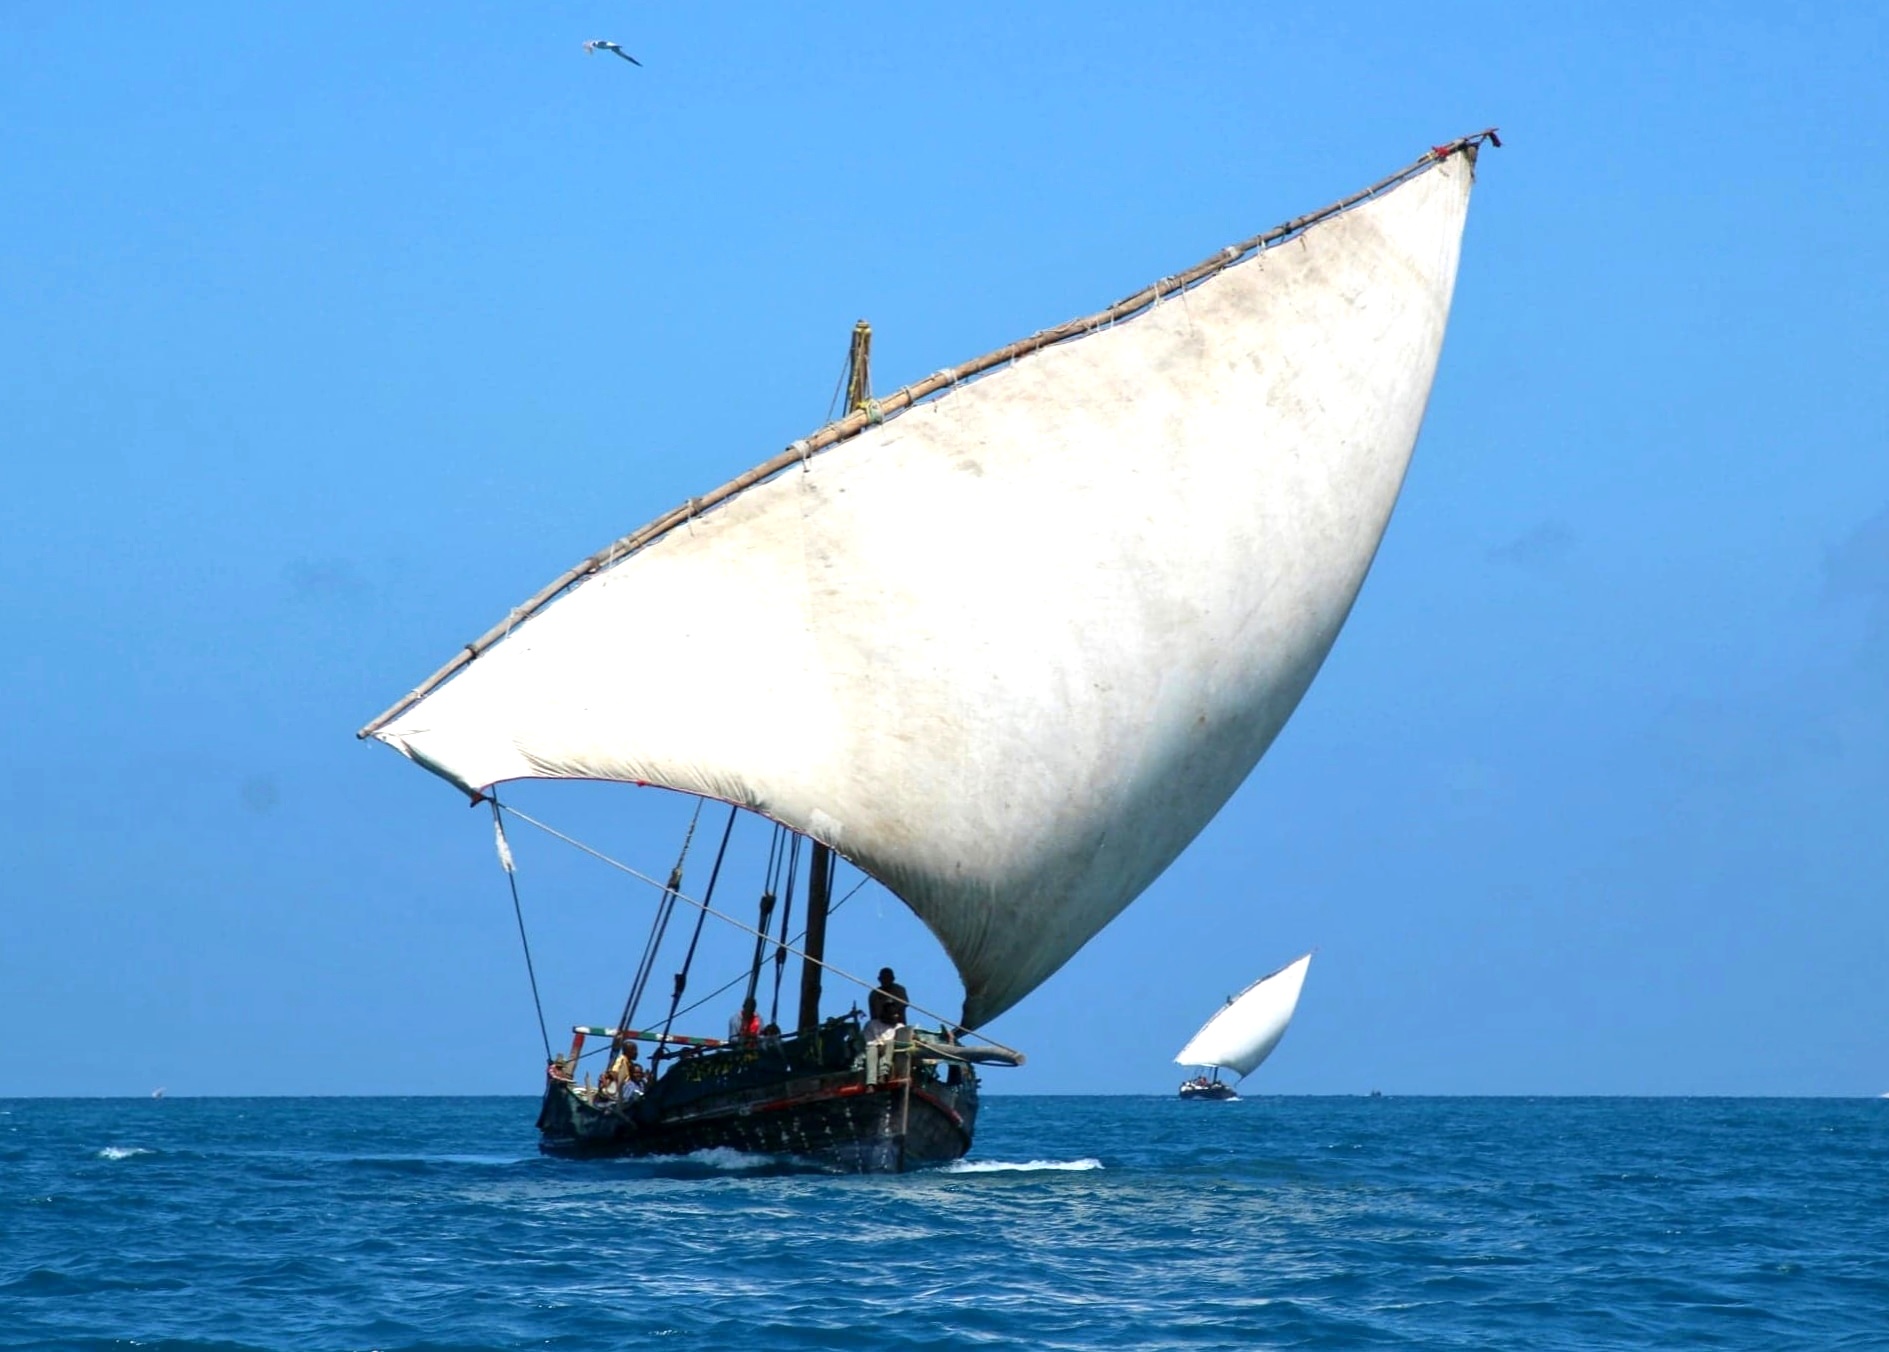 dhow sailboat